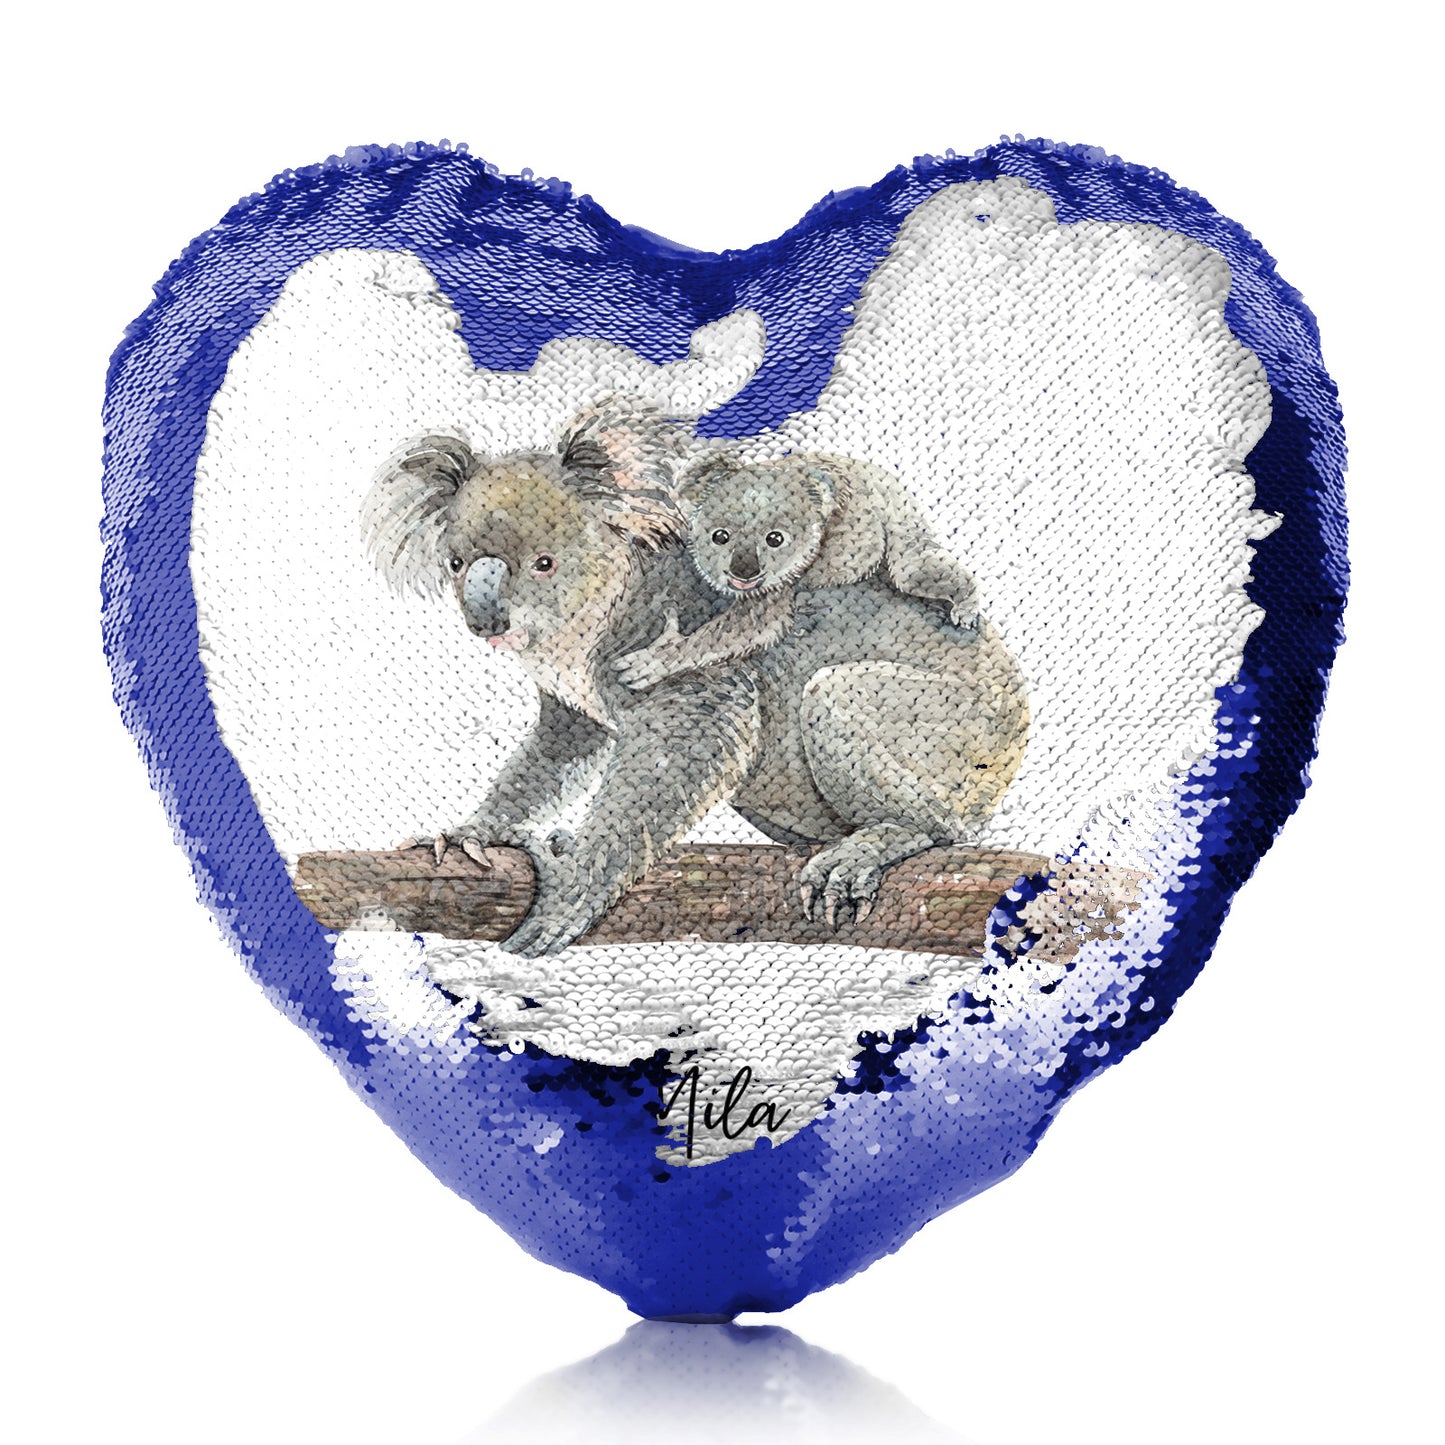 Personalised Sequin Heart Cushion with Welcoming Text and Embracing Mum and Baby Koalas